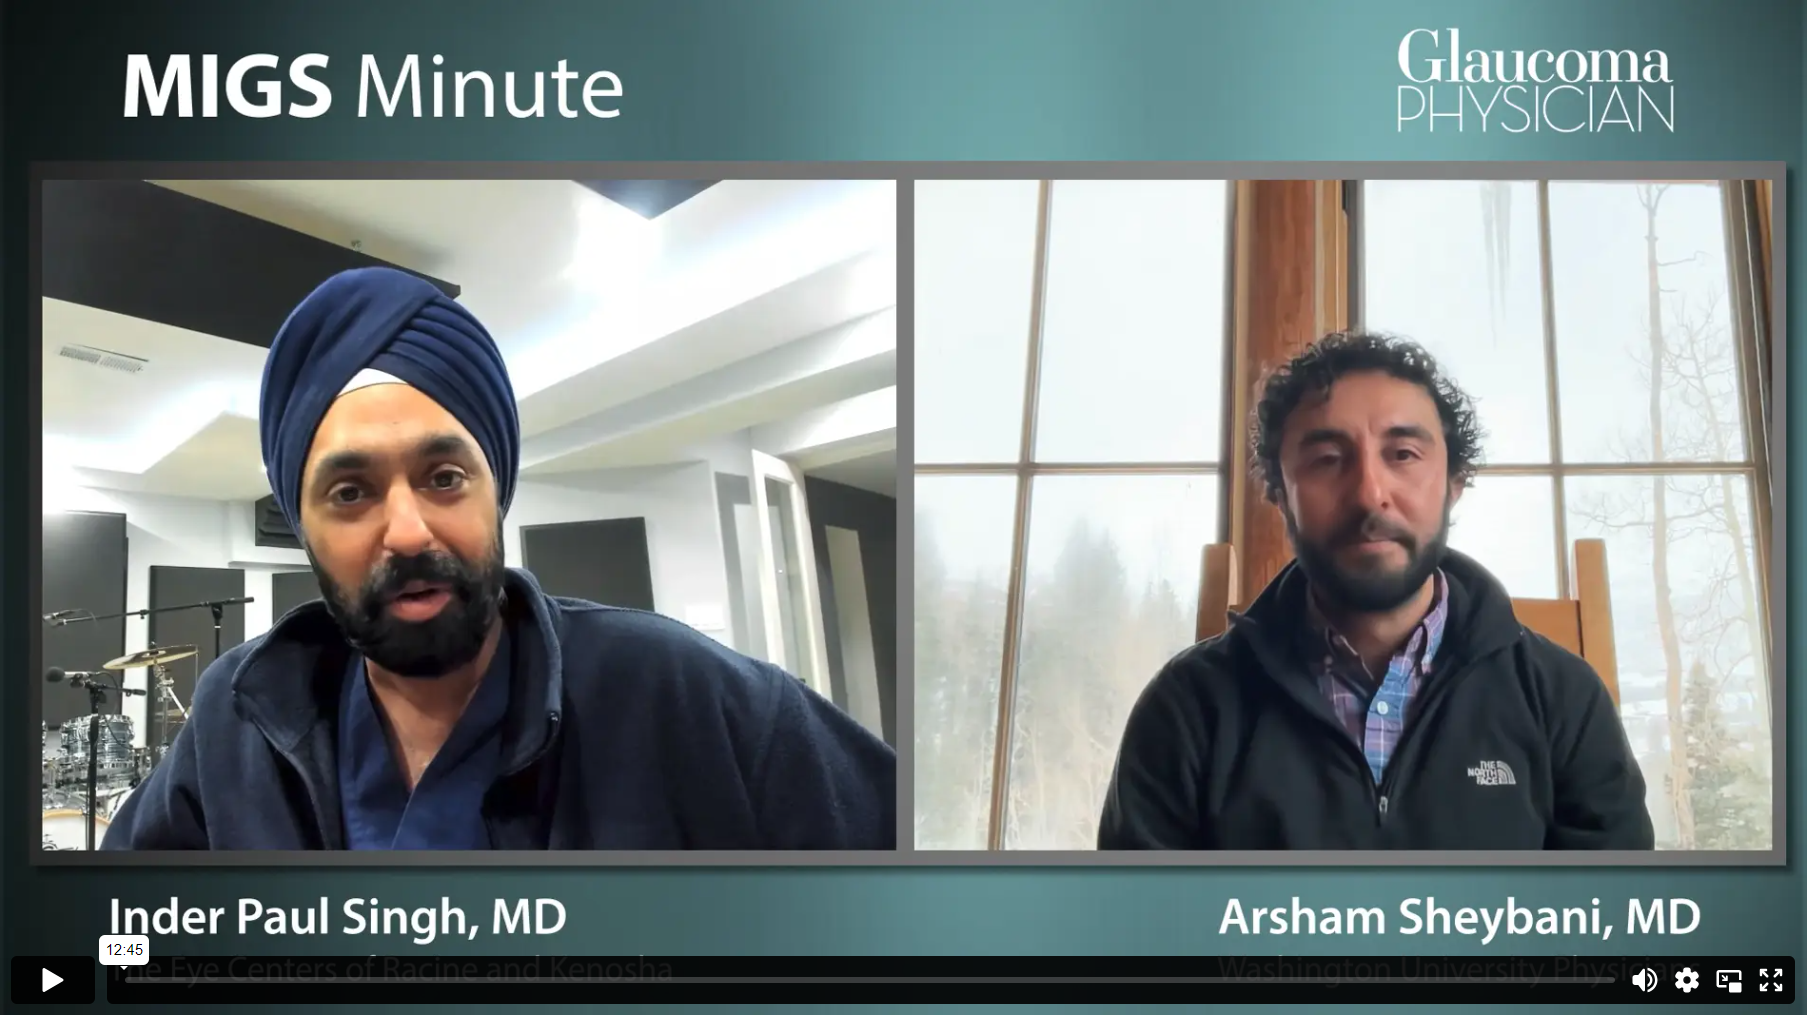 Episode 4: Inder Paul Singh, MD and Arsham Sheybani, MD discuss if MIGS has become standard of care with cataract surgery.